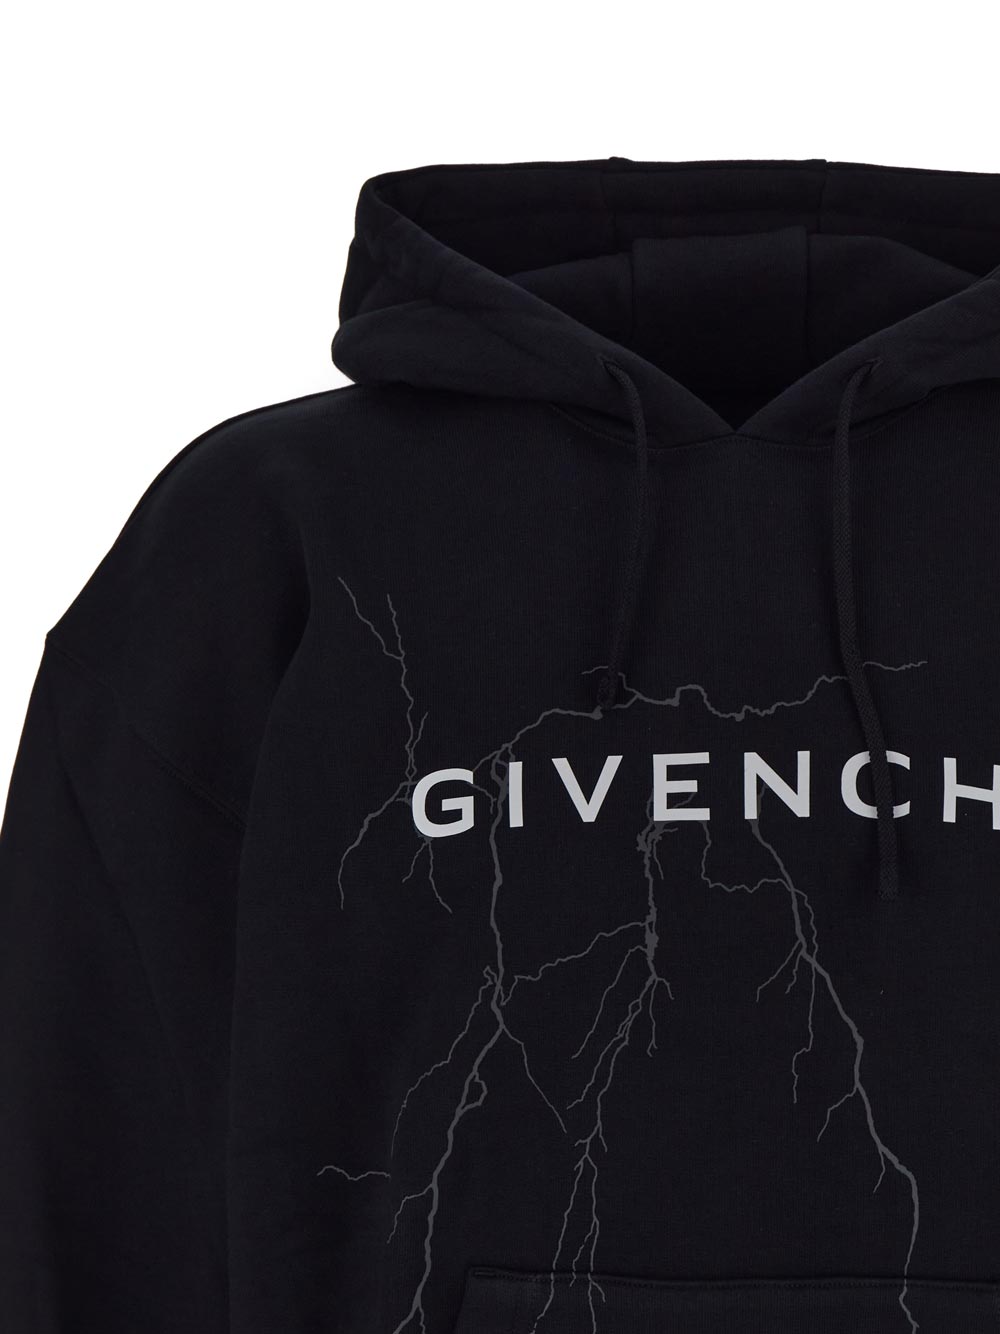 Givenchy Thunderbolt-Print Cotton Hoodie